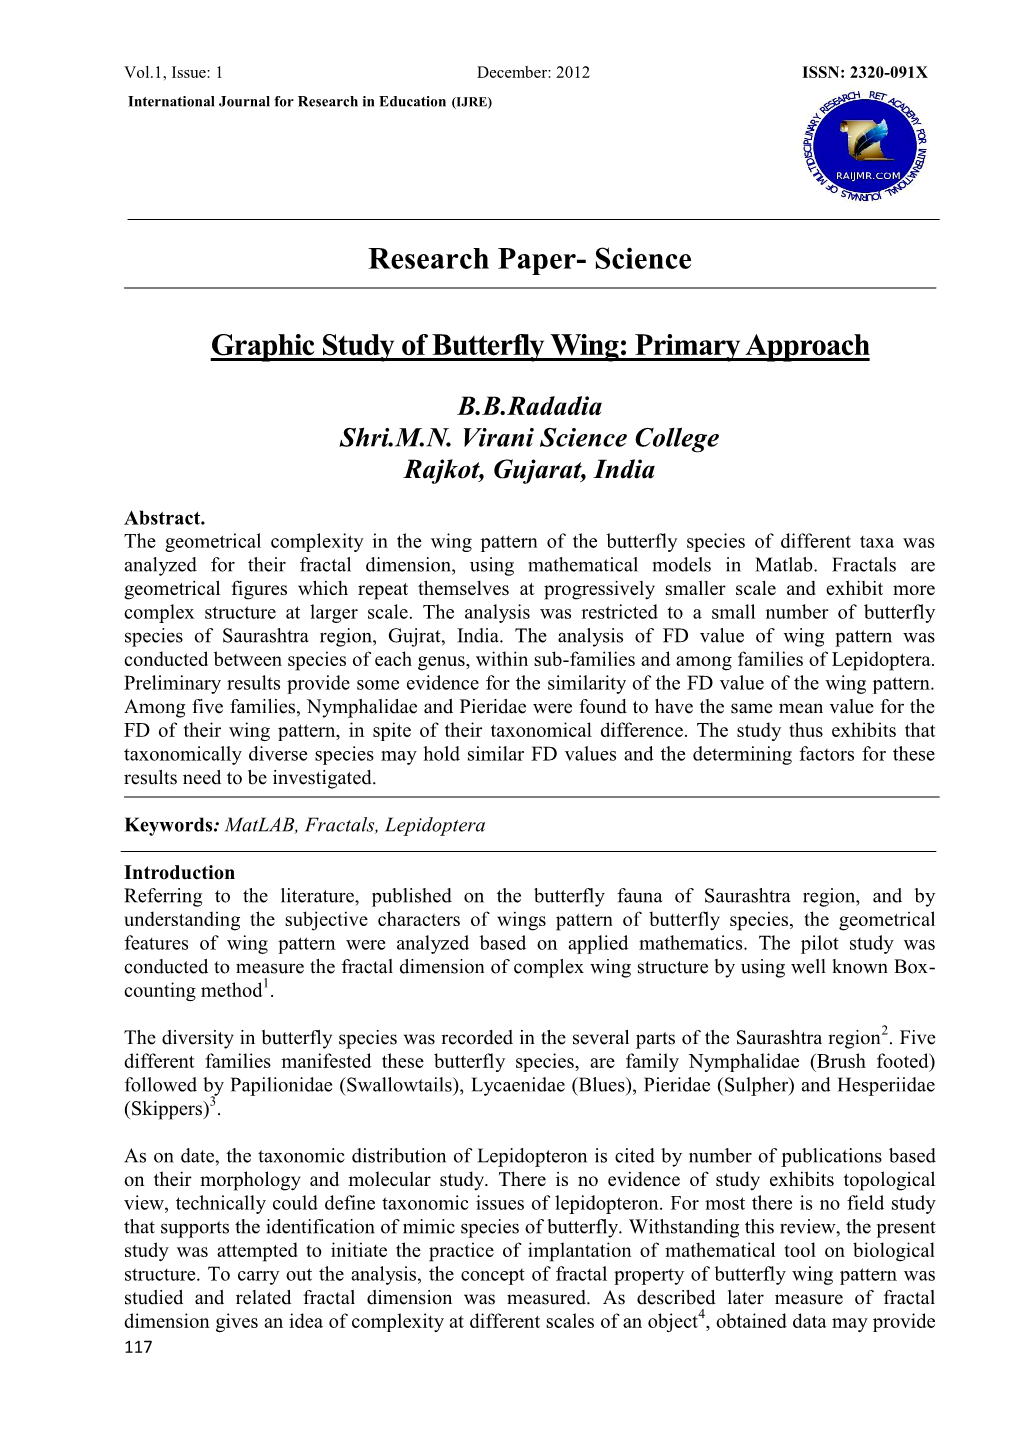 Research Paper- Science